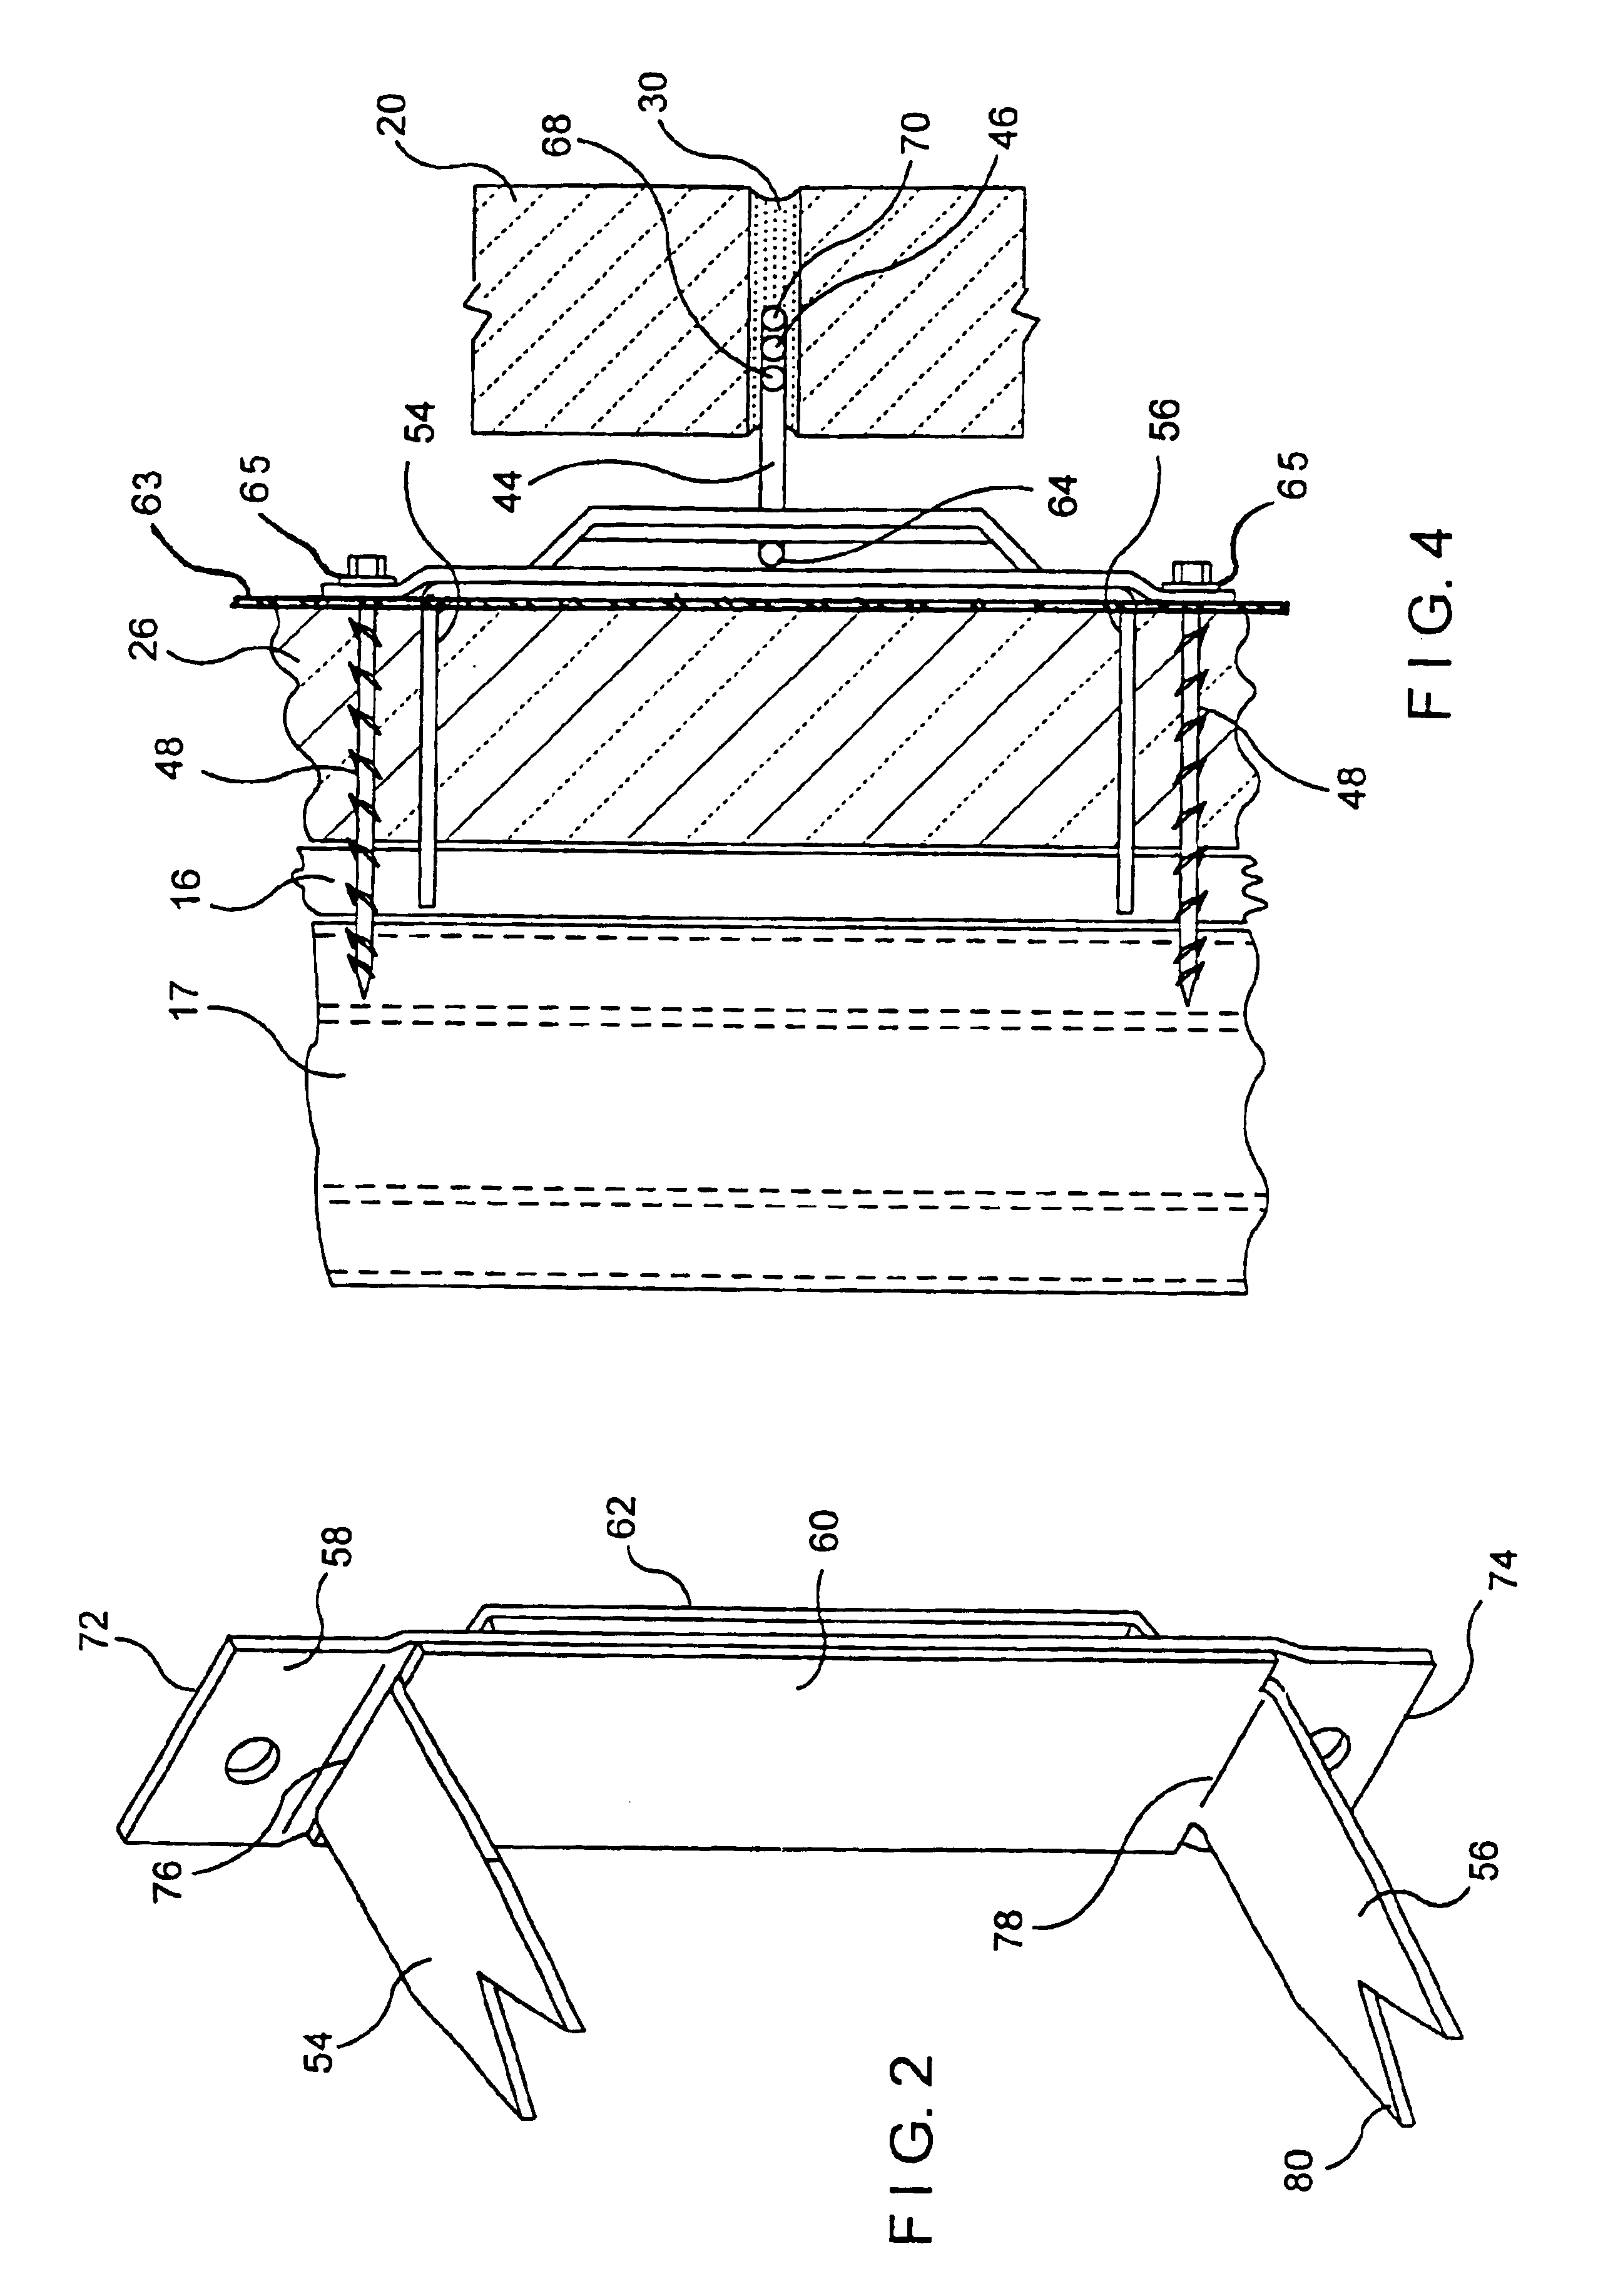 Folded wall anchor and surface-mounted anchoring